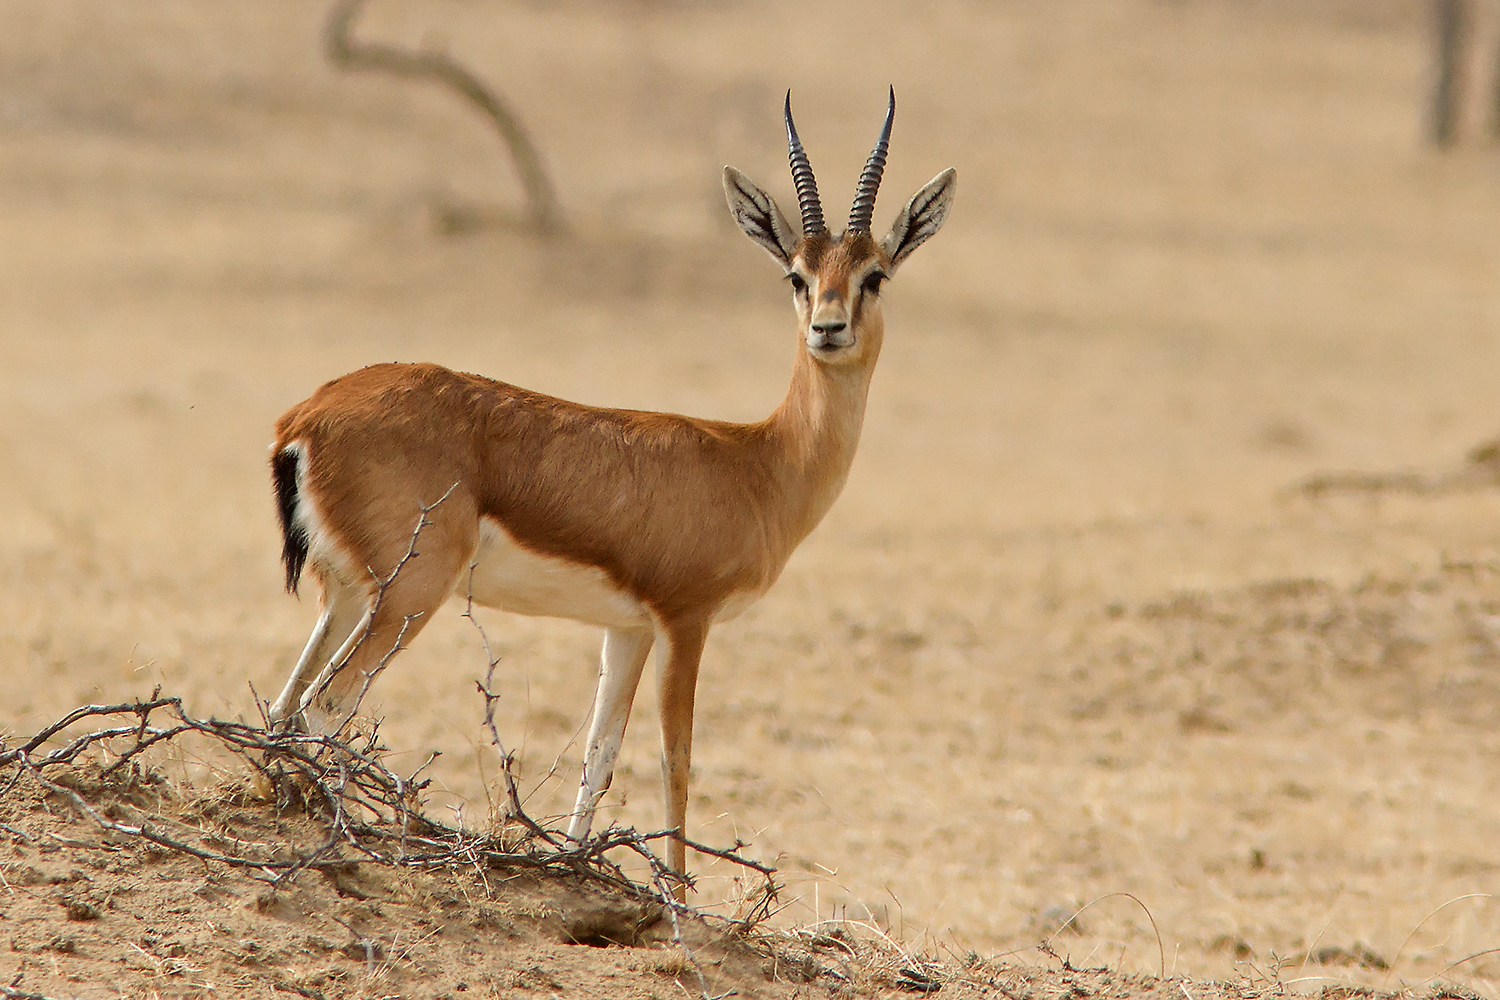 Chinkara is very common in the park